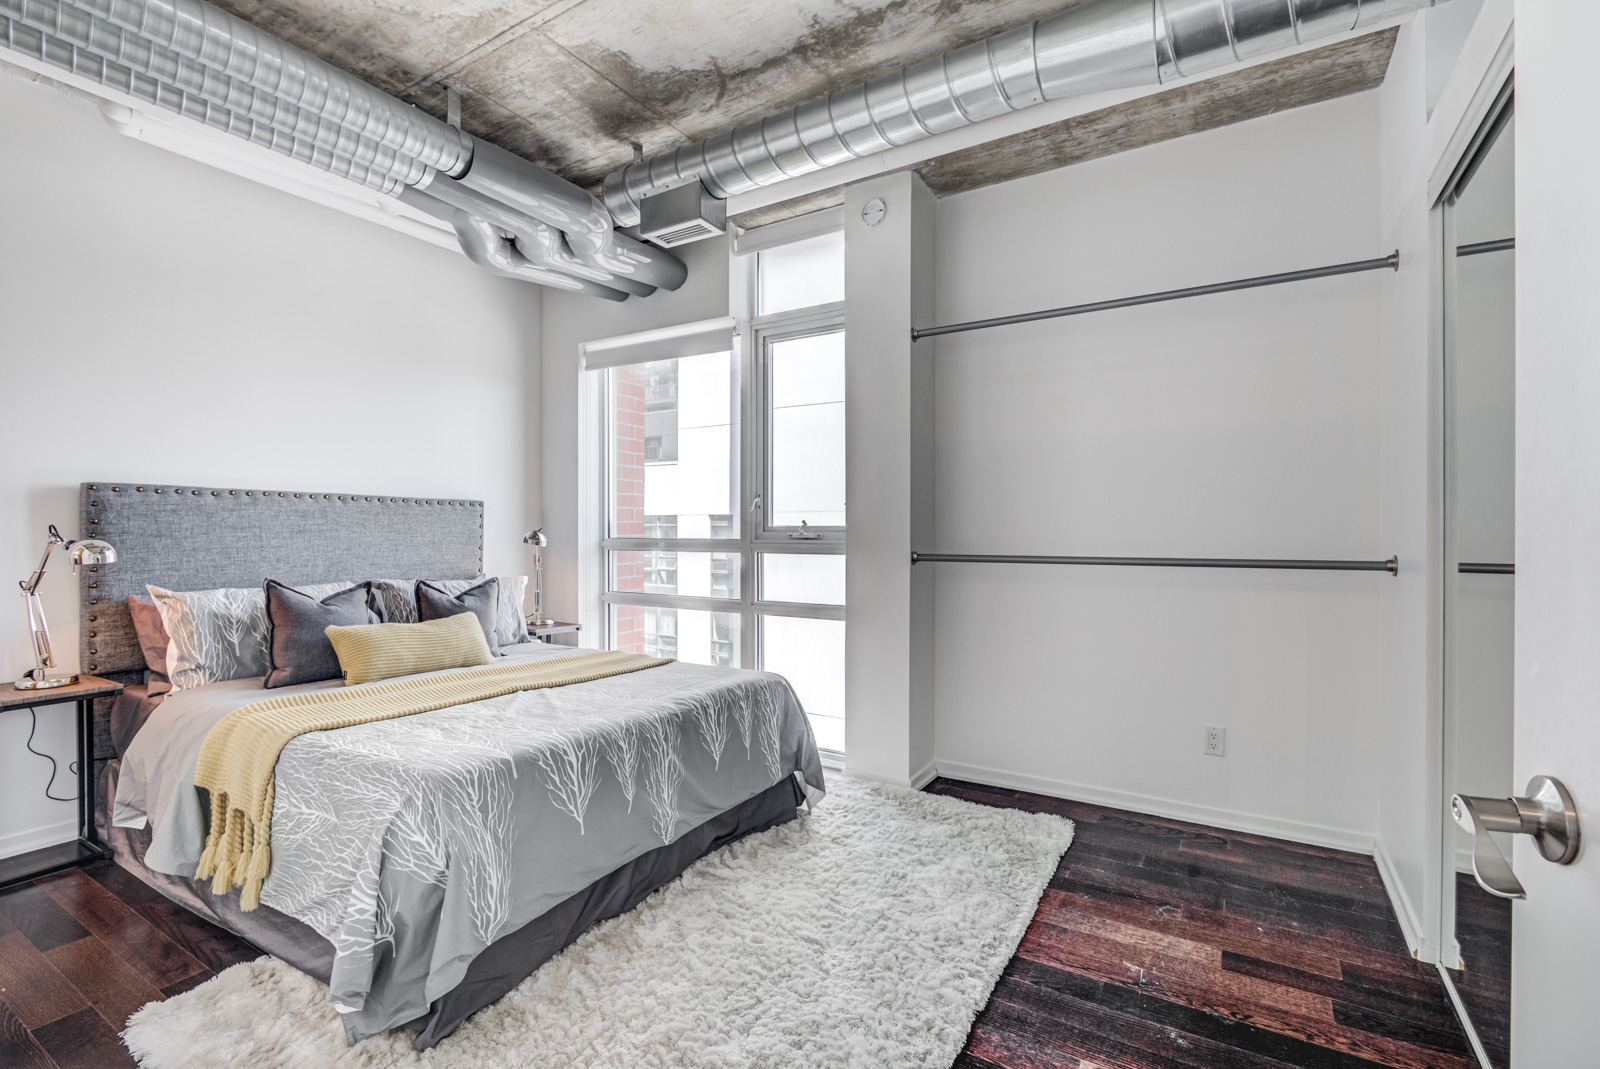 Large master bedroom in soft loft, plus exposed piping, concrete walls and hardwood floors.